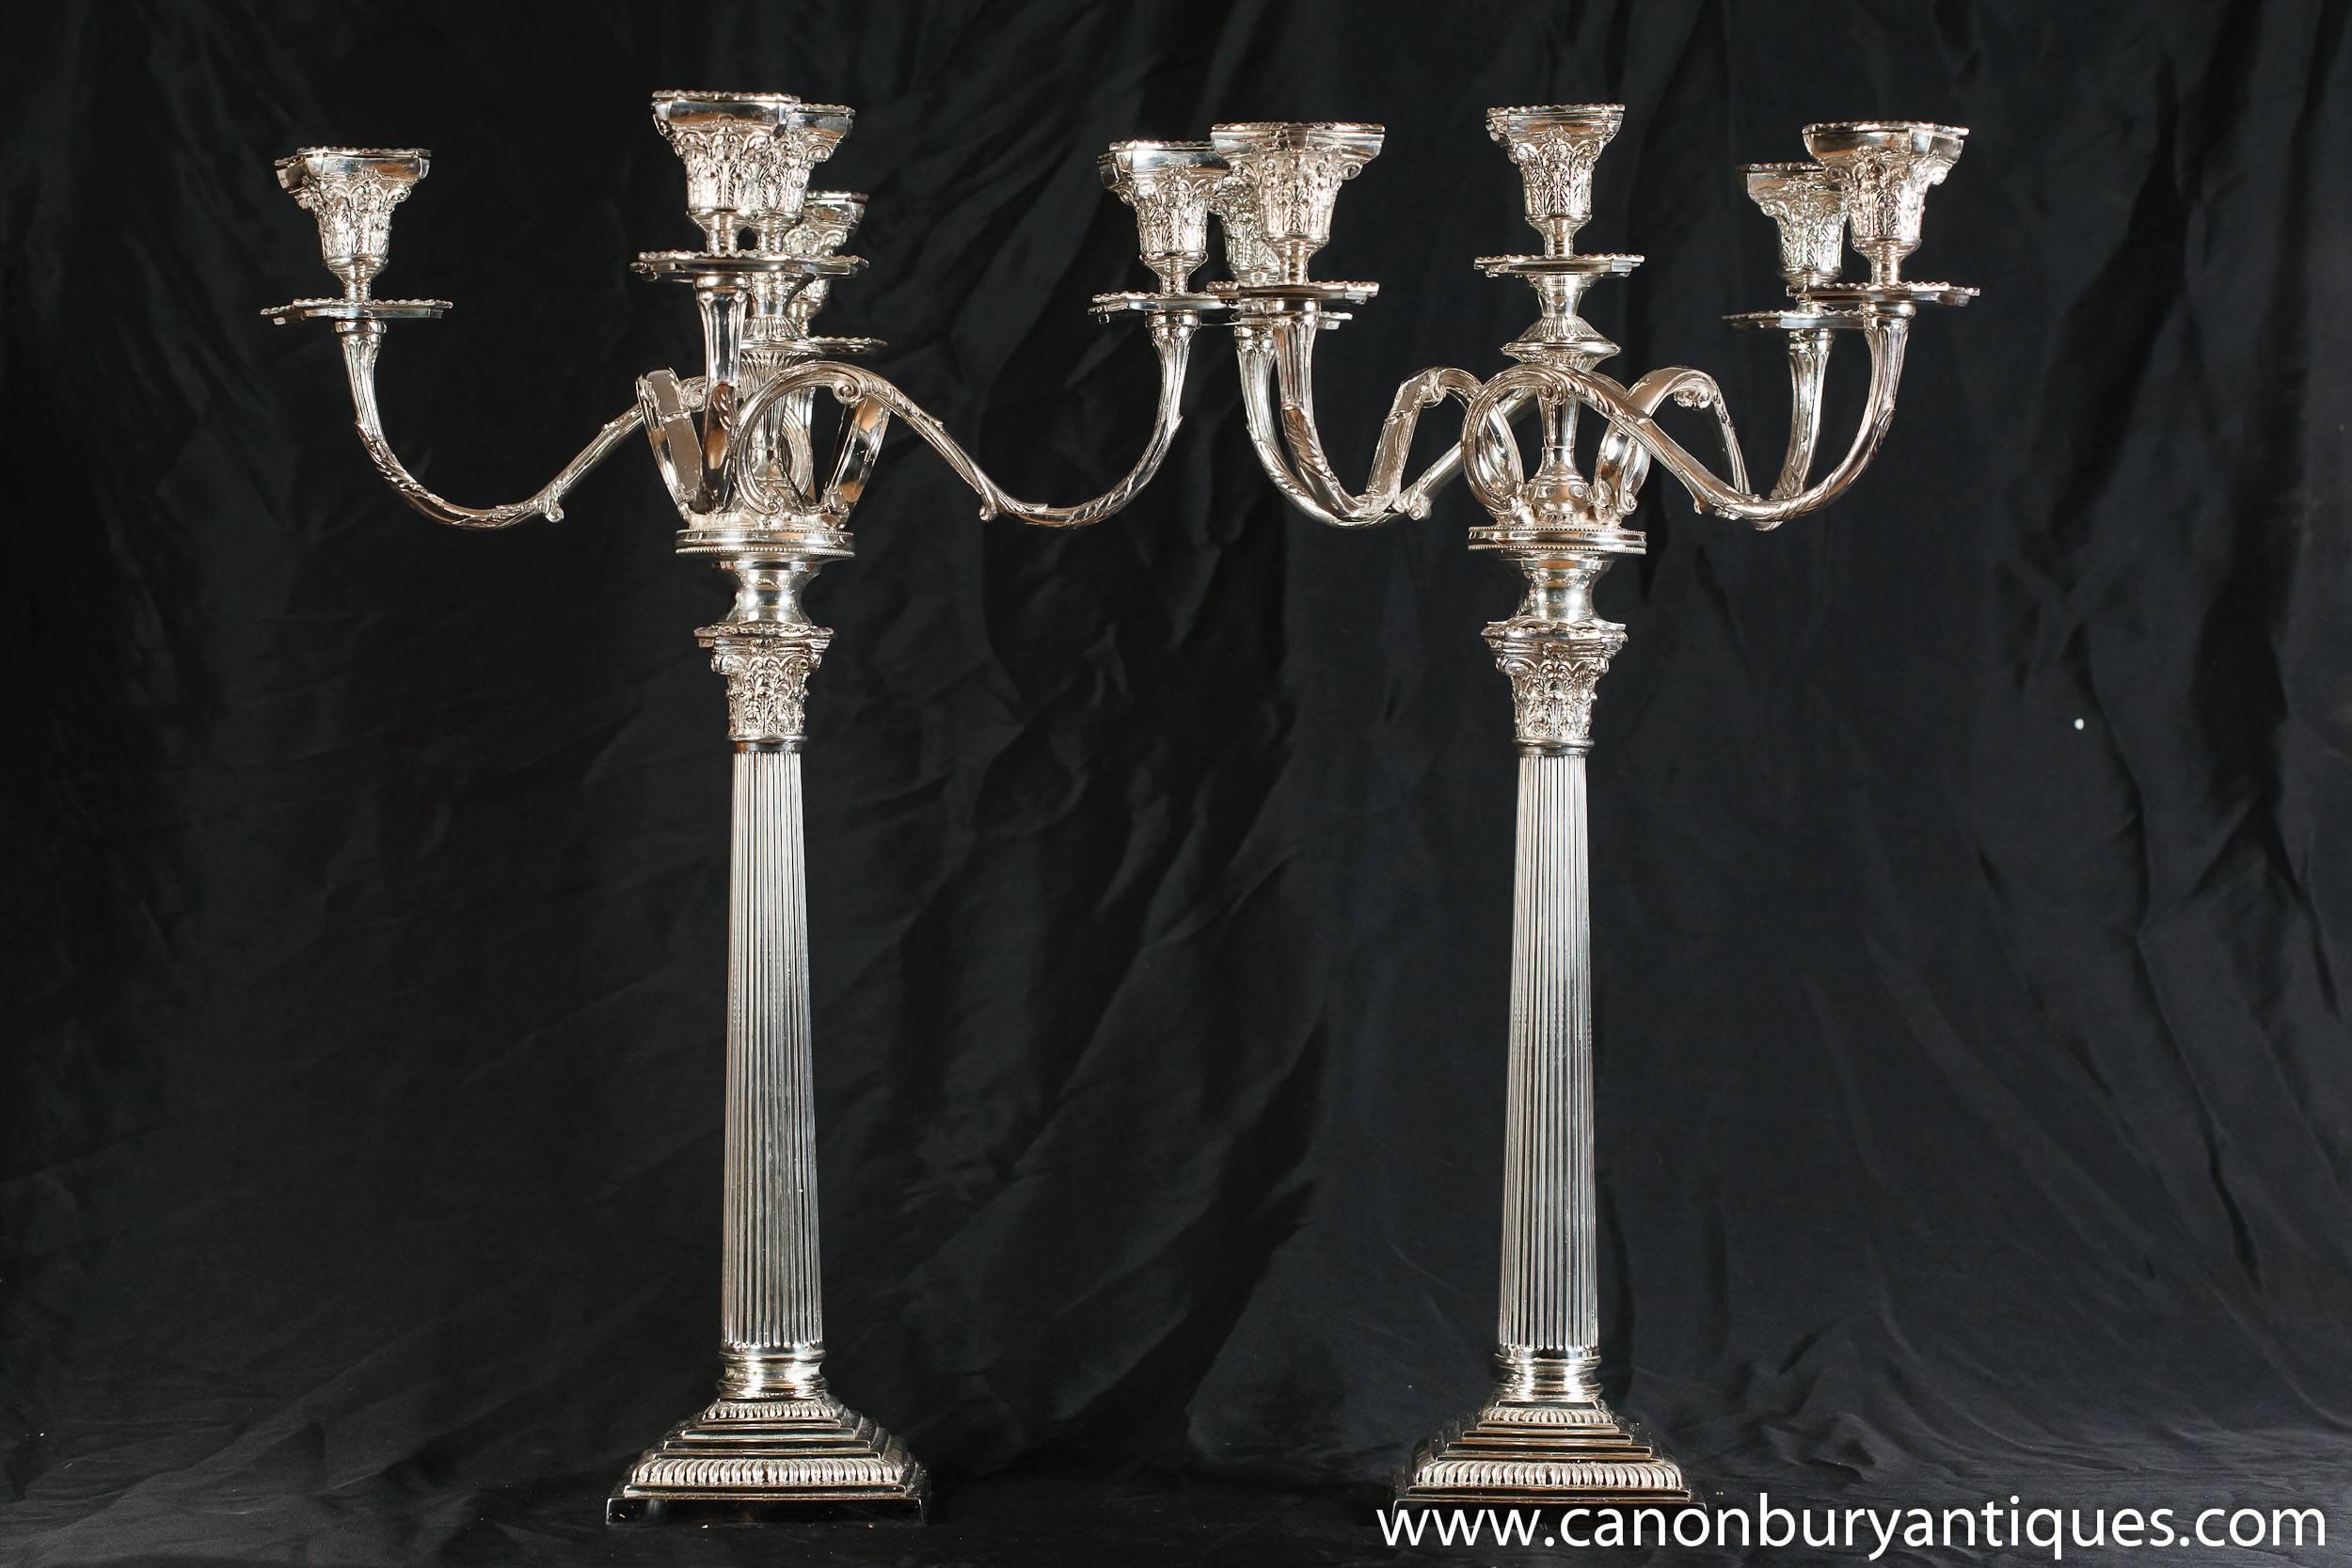 Regency Style Silver Plate Candelabras Doric Column Candles In Good Condition For Sale In Potters Bar, Herts